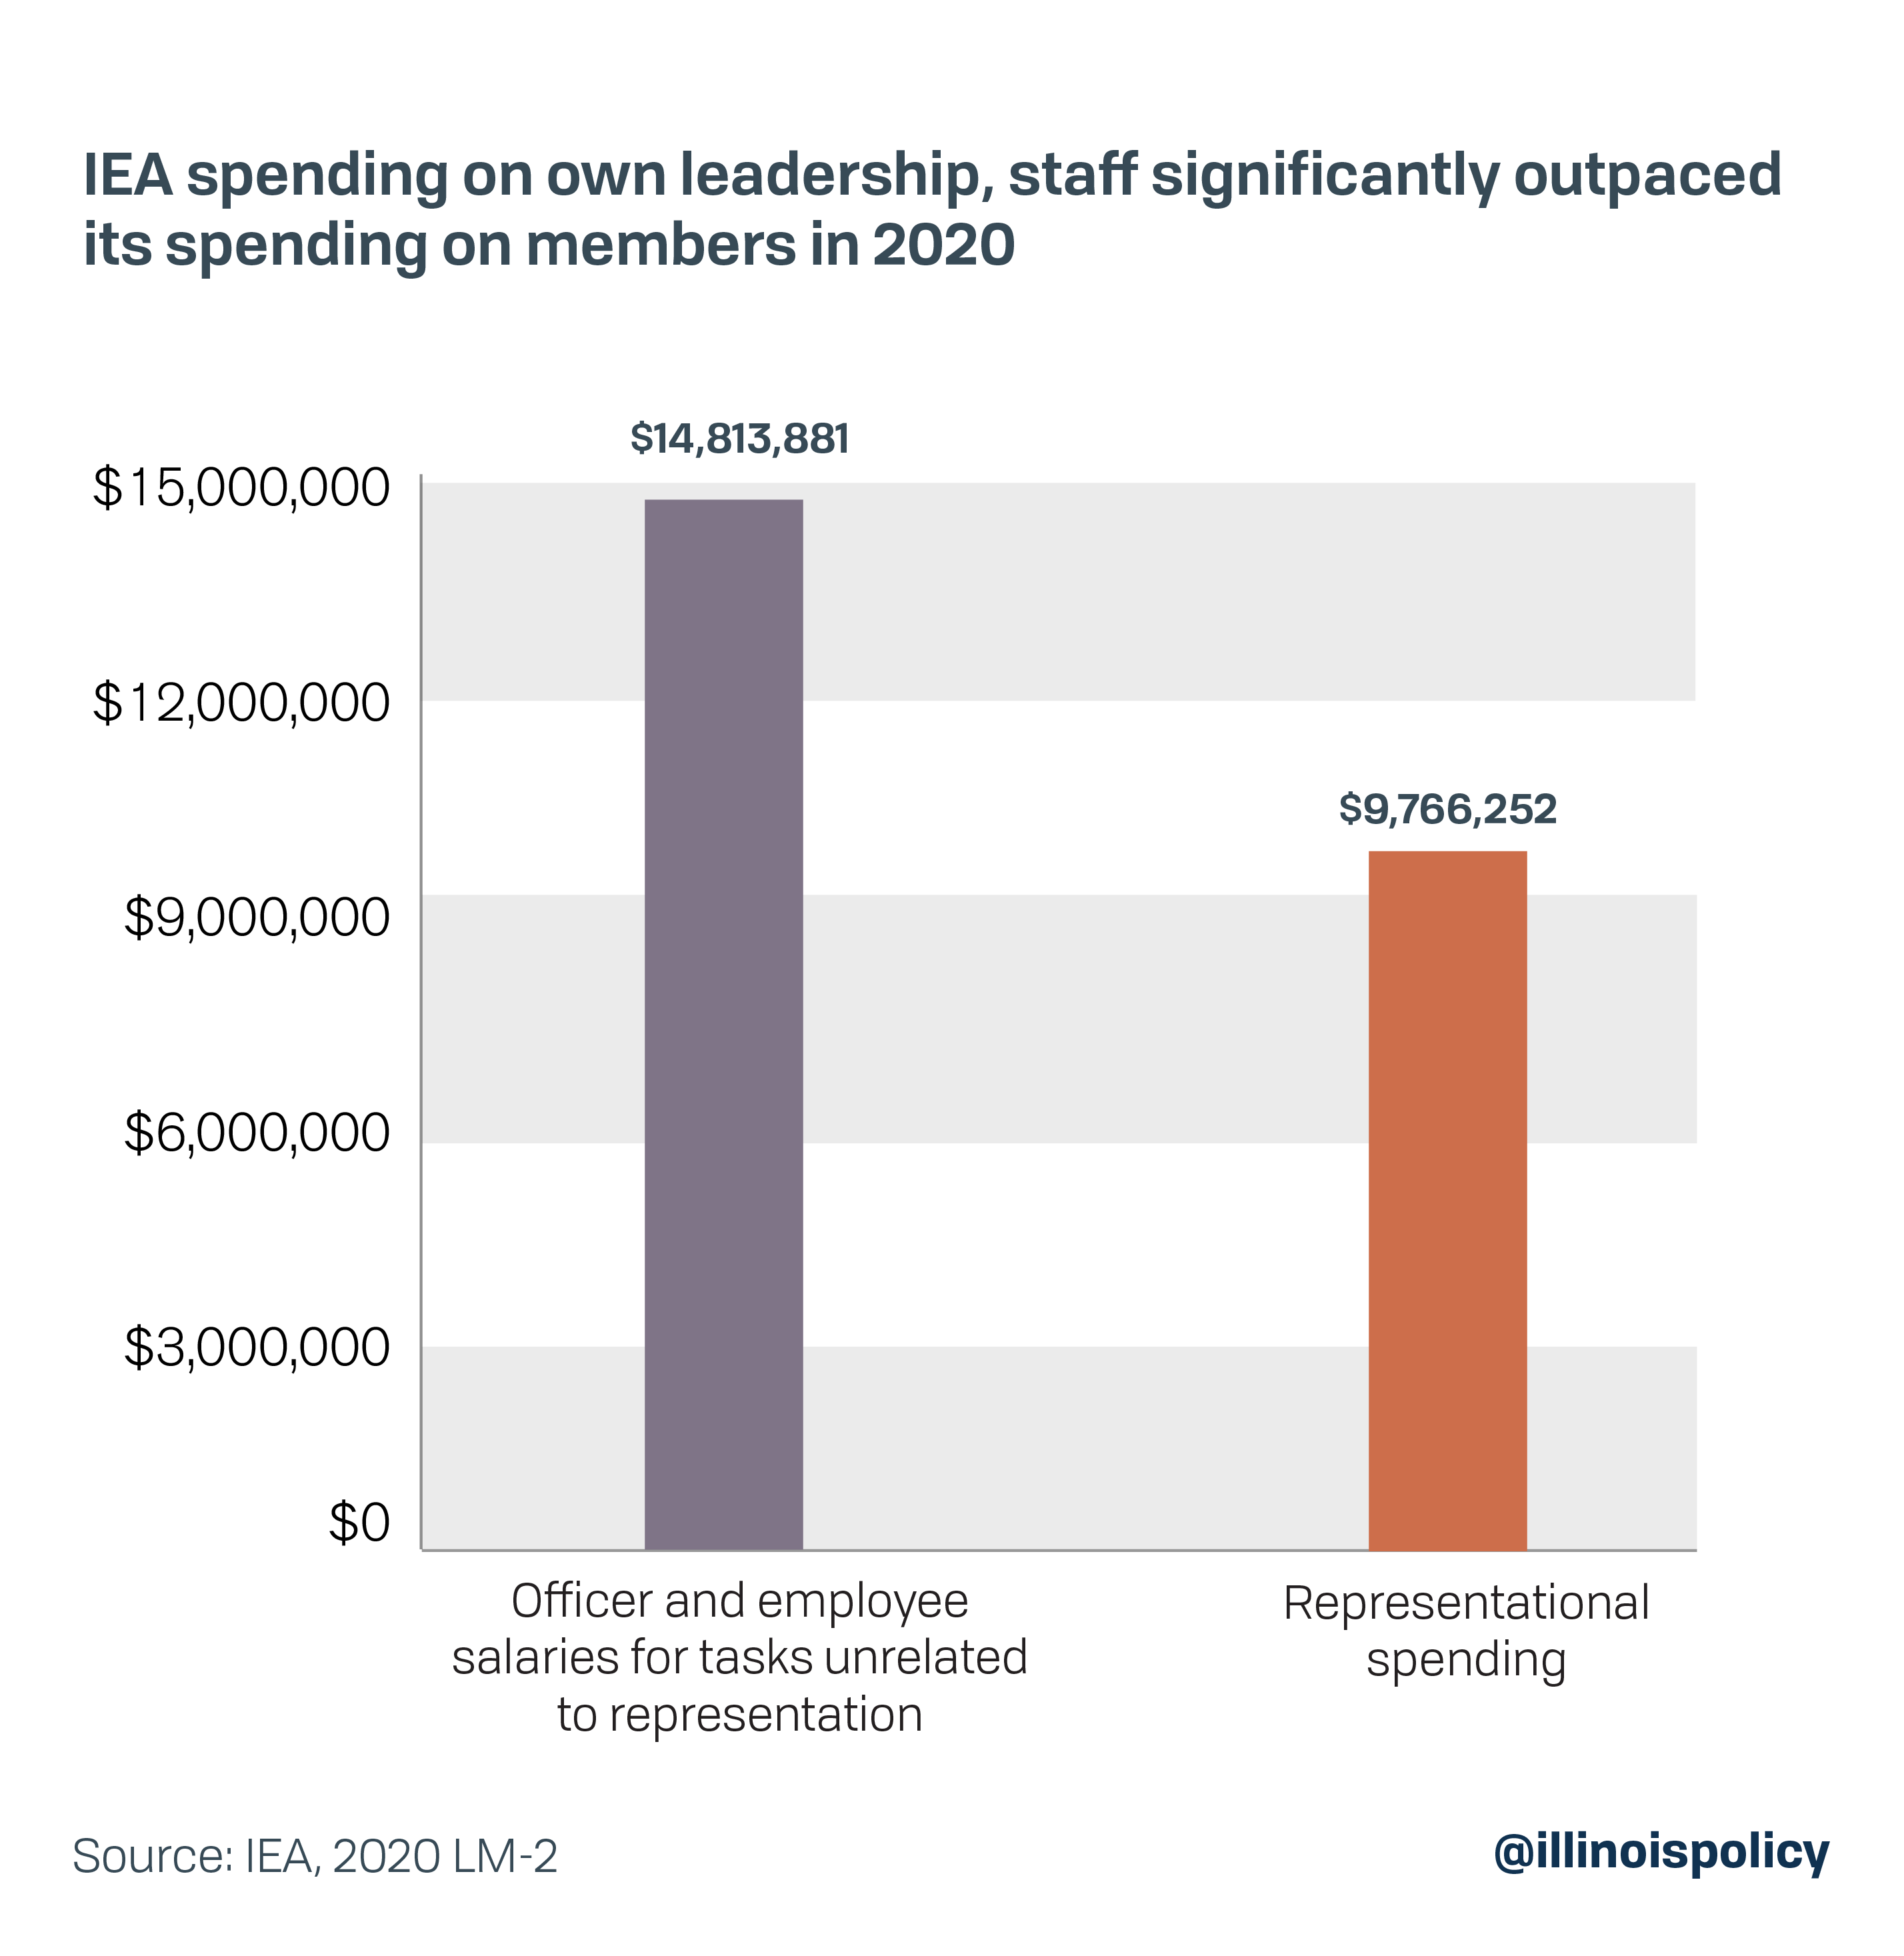 IEA spending on own leadership, staff significantly outpaced its spending on members in 2020